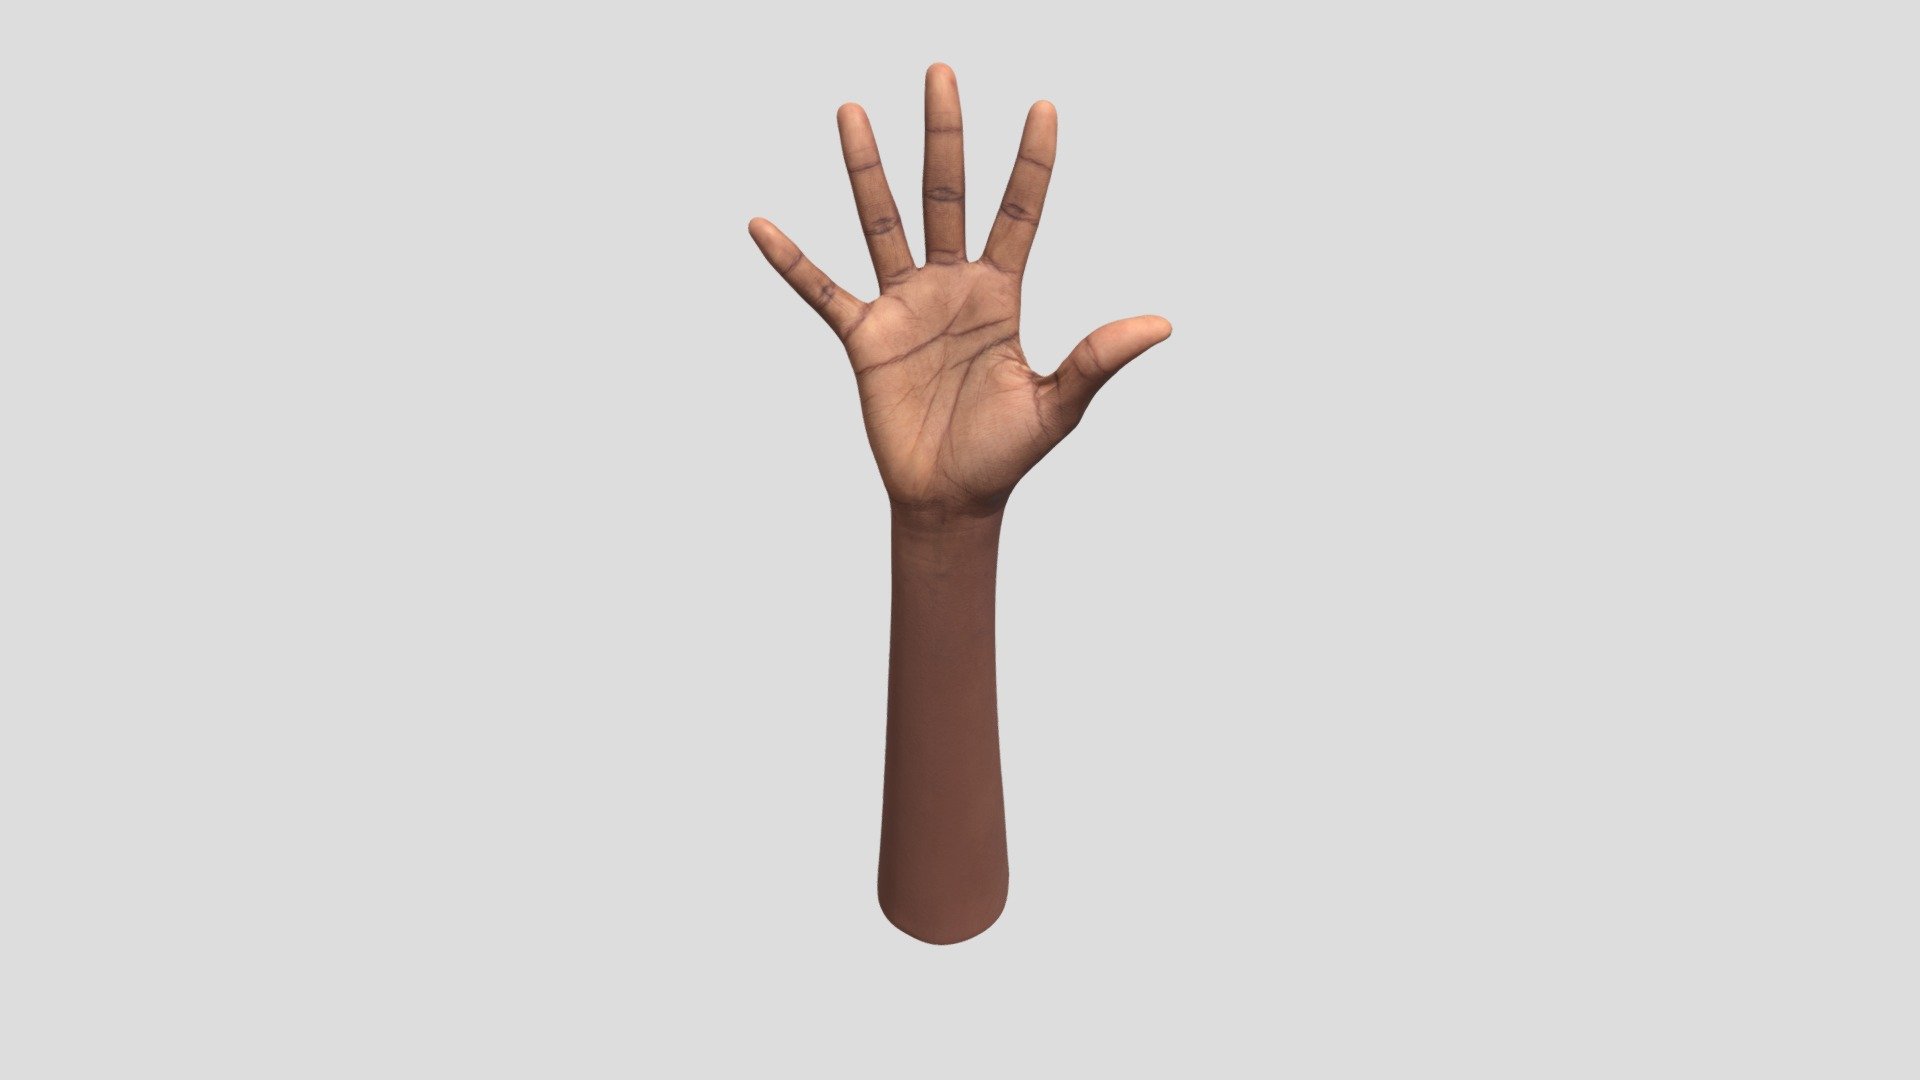 We would like to introduce you to one of the many retopologized hands that offers precise retopology.This hand is perfect for anyone looking for a realistic and aesthetically crafted model for their projects. Find out how this collection can enrich your creative work and give it the visual punch it needs!

Ethnicity: Black
Gender: Female
Age: 25
Height: 173 cm
Weight: 62 kg

NOTE: Retopologized scan with postproduction.

Technical Specifications:

1 x OBJ. File / 19 600 polys
2 x 8K PNG Texture - Diffuse, Normal

3Dsk provides all you need from virtual casting studio. Model casting, neutral &amp; morph expression scans, full body scans, accessories and cloth scans, 3D postproduction, photoshooting of full body, portrait, hair, eyes and skin &amp; other on demand services 3d model